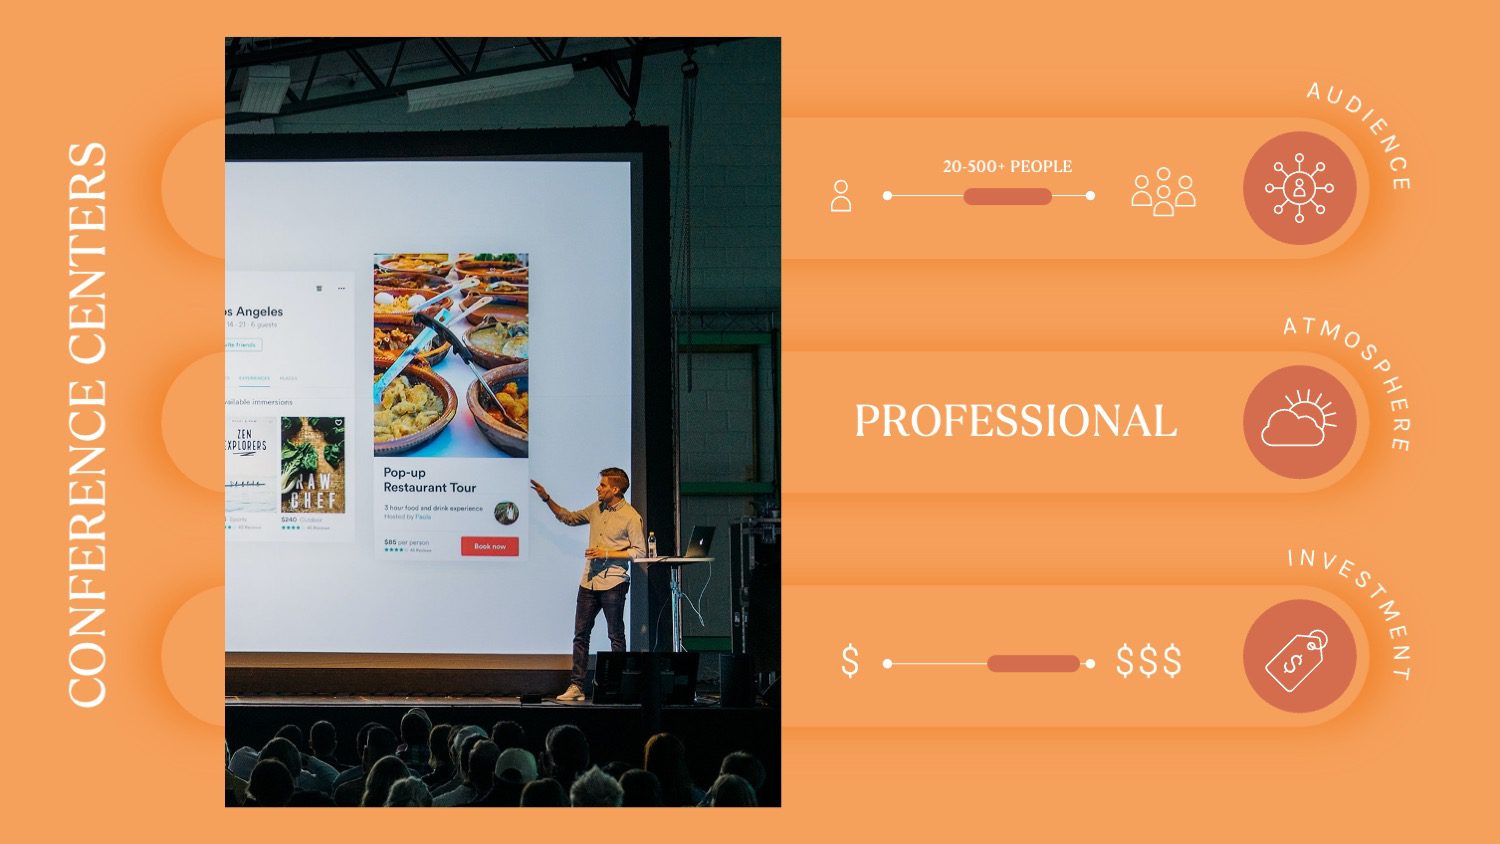 PowerPoint Presentation Design Conference Centres